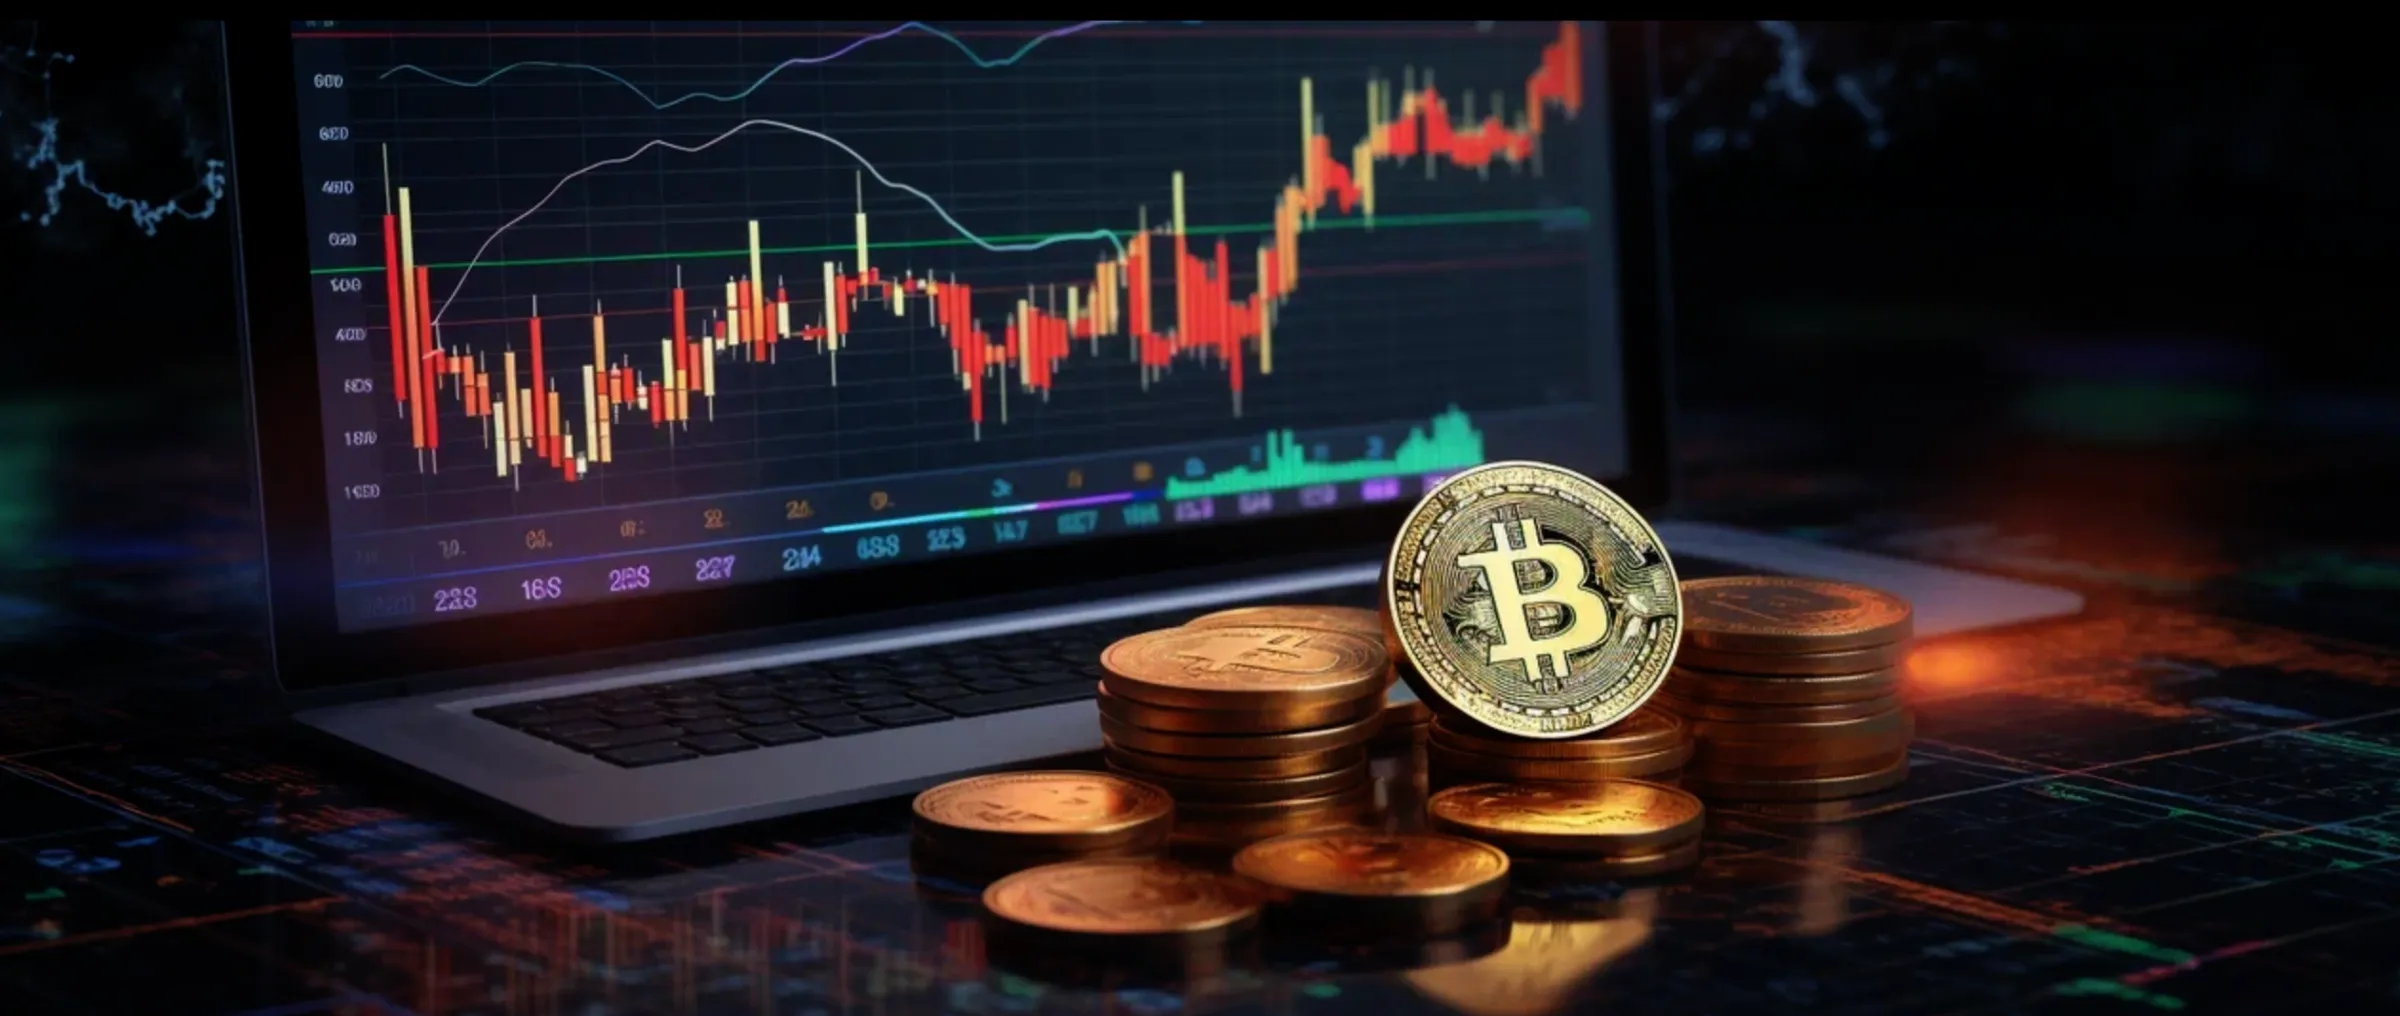 The price of bitcoin will drop to the level of $30,000.